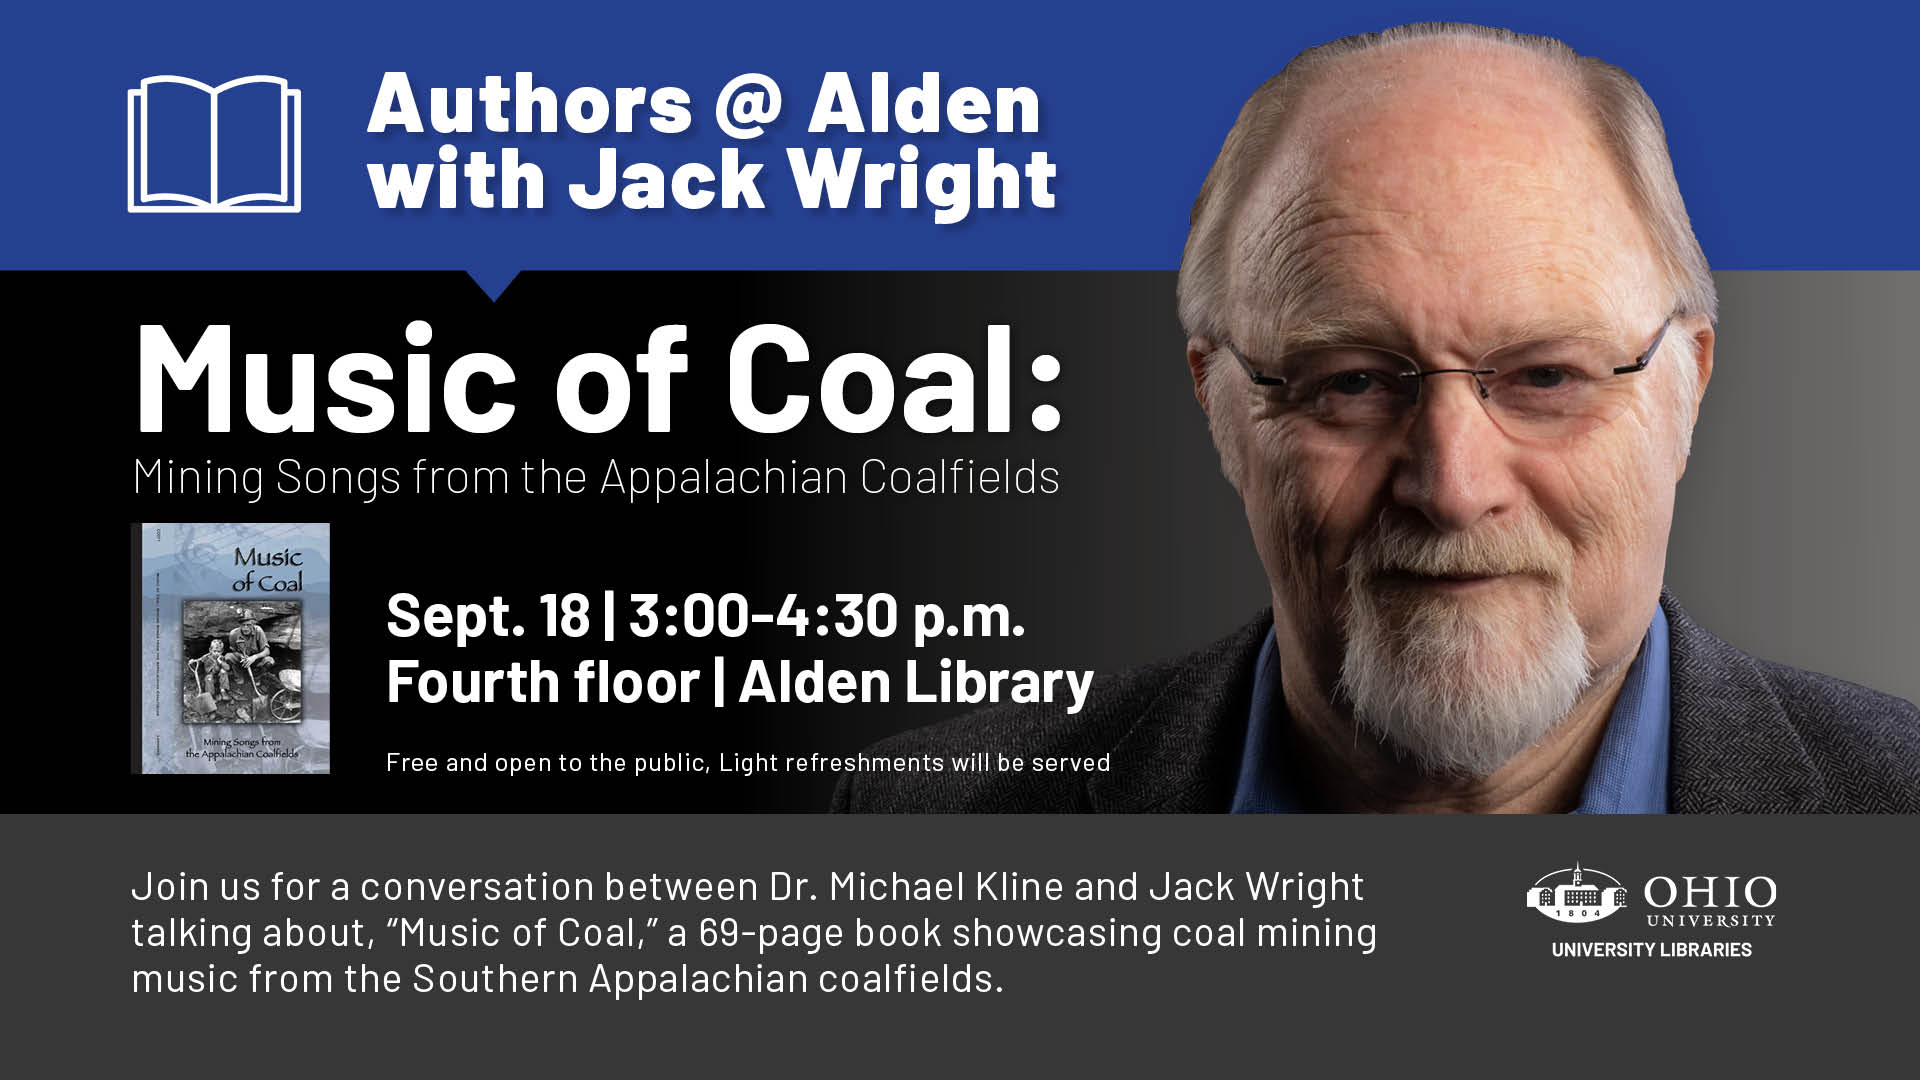 On Sept. 18, 2019 from 3-4:30 p.m. on Alden’s fourth floor, the University Libraries will host a special conversation on coal mining music and its unique history and culture.